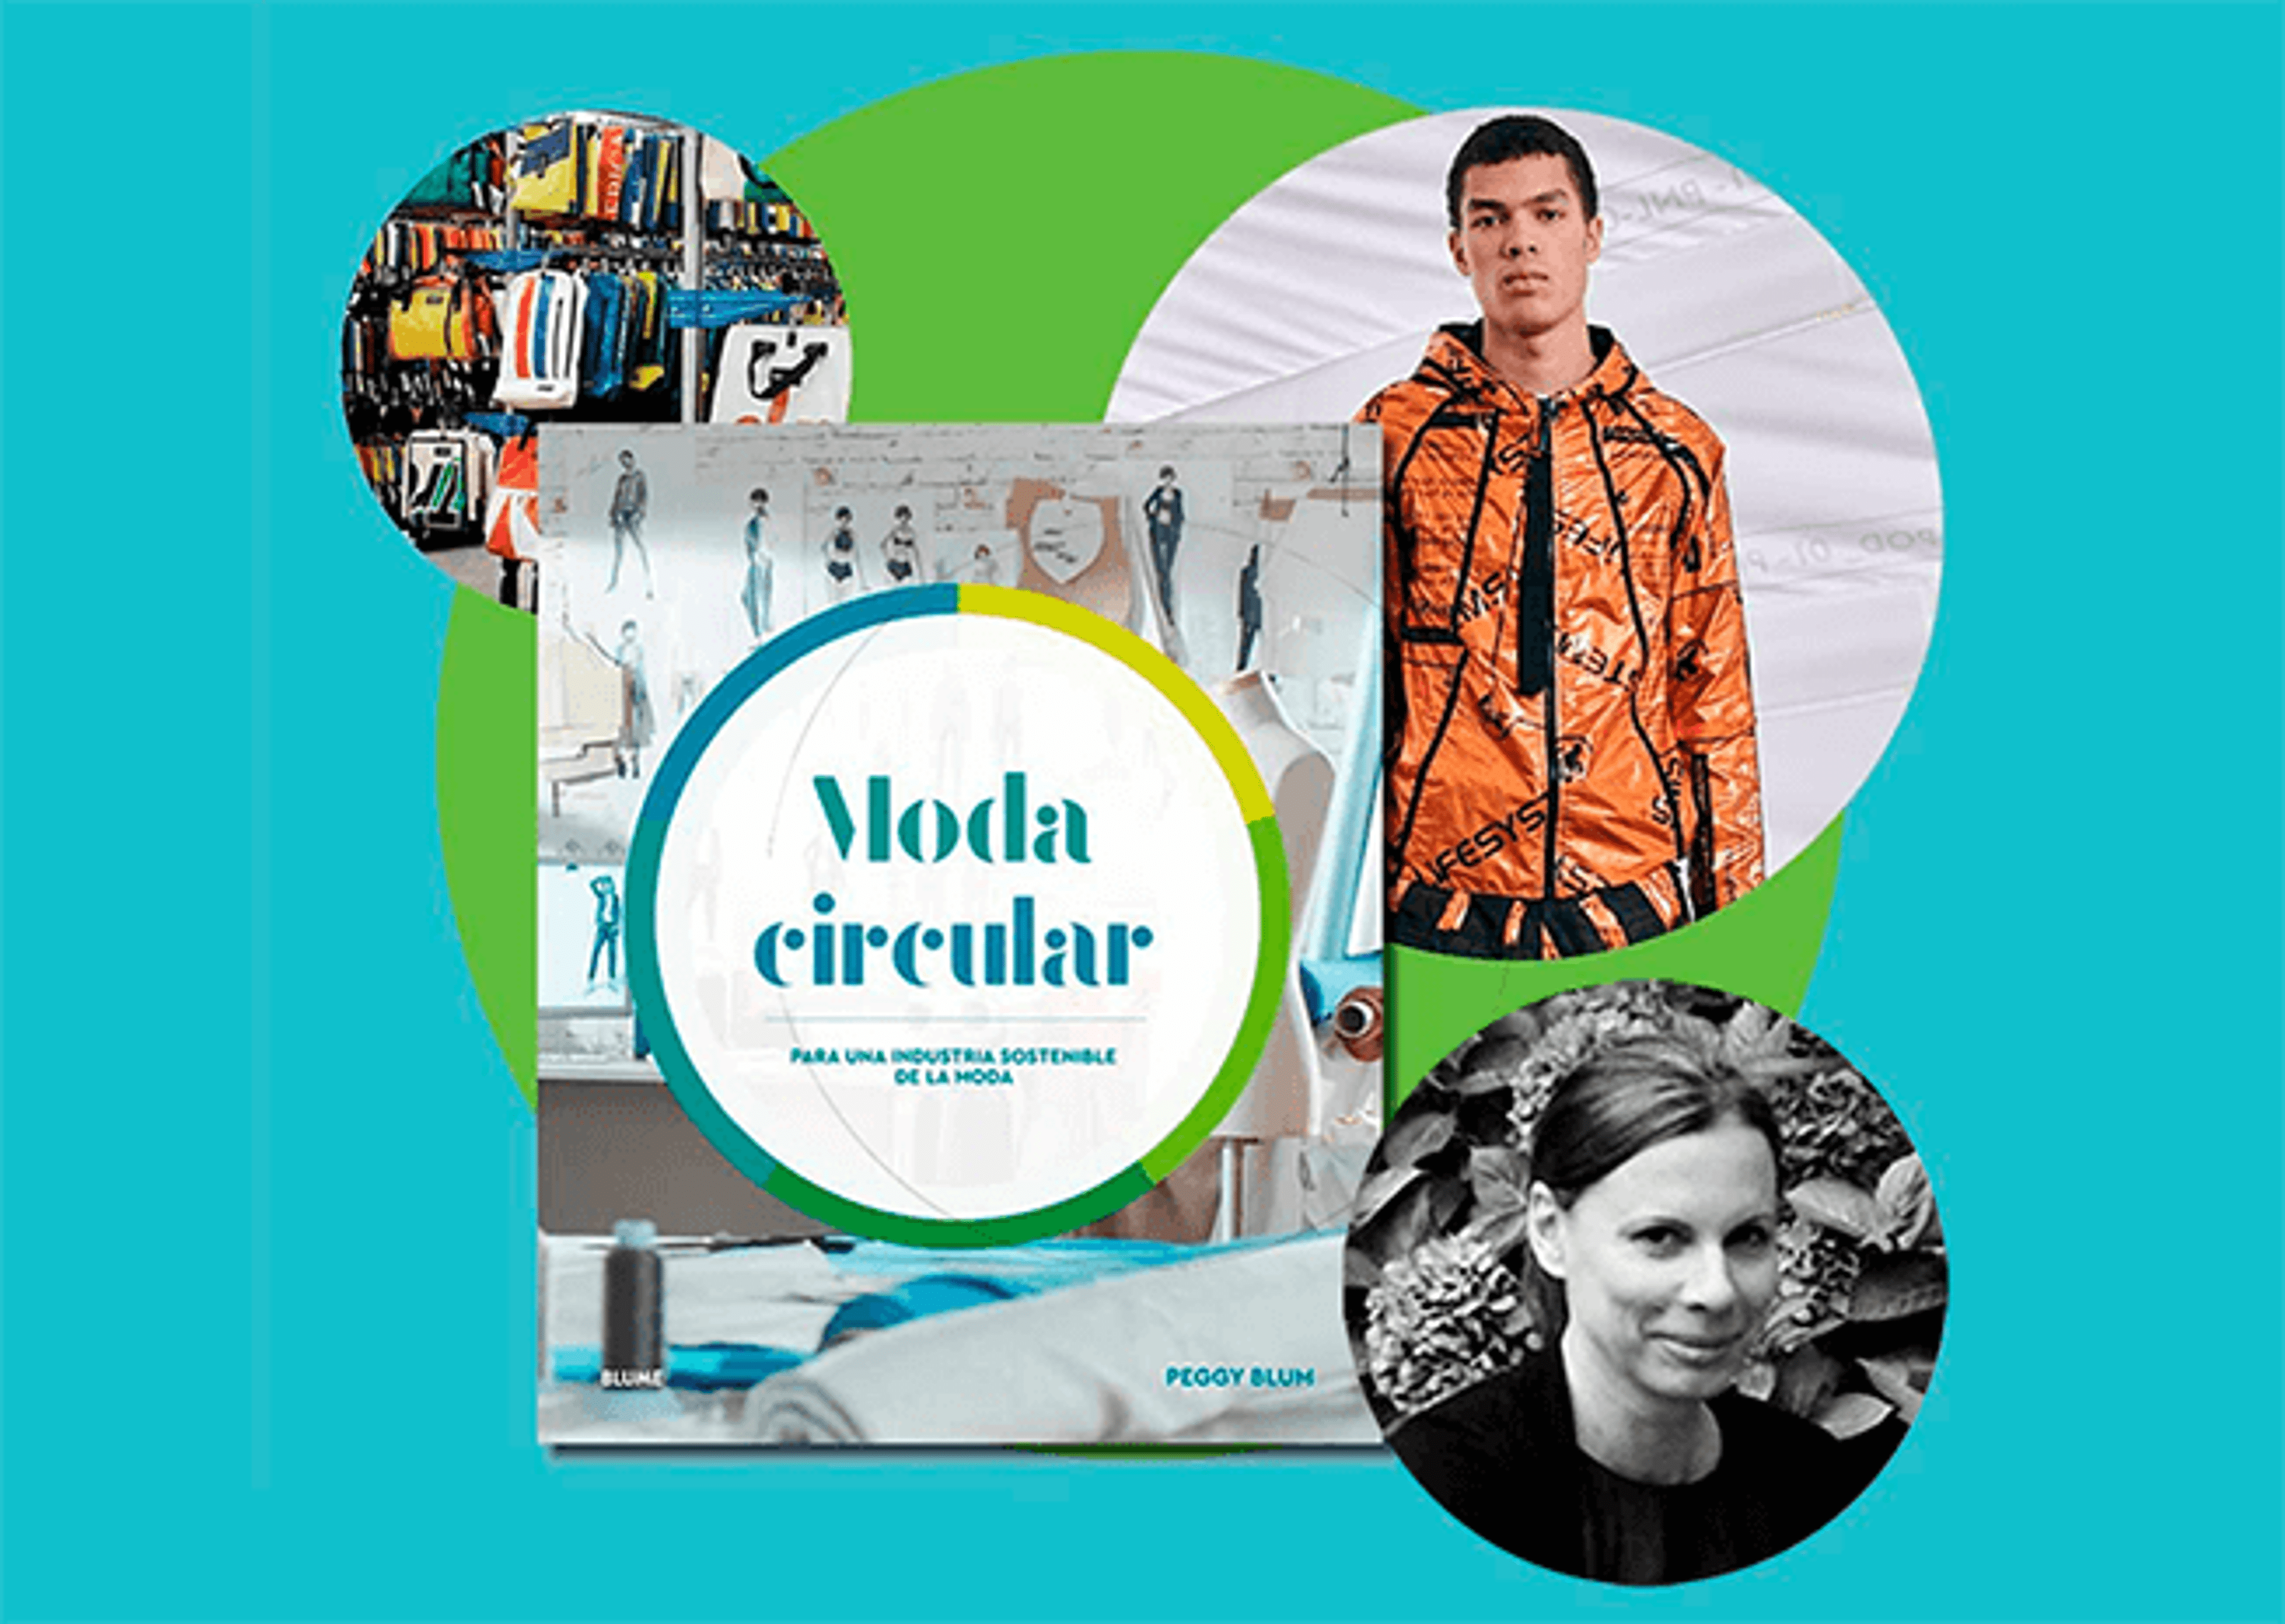 A collage of images featuring individuals and fashion items, with the central theme of "Moda circular" for sustainable fashion.